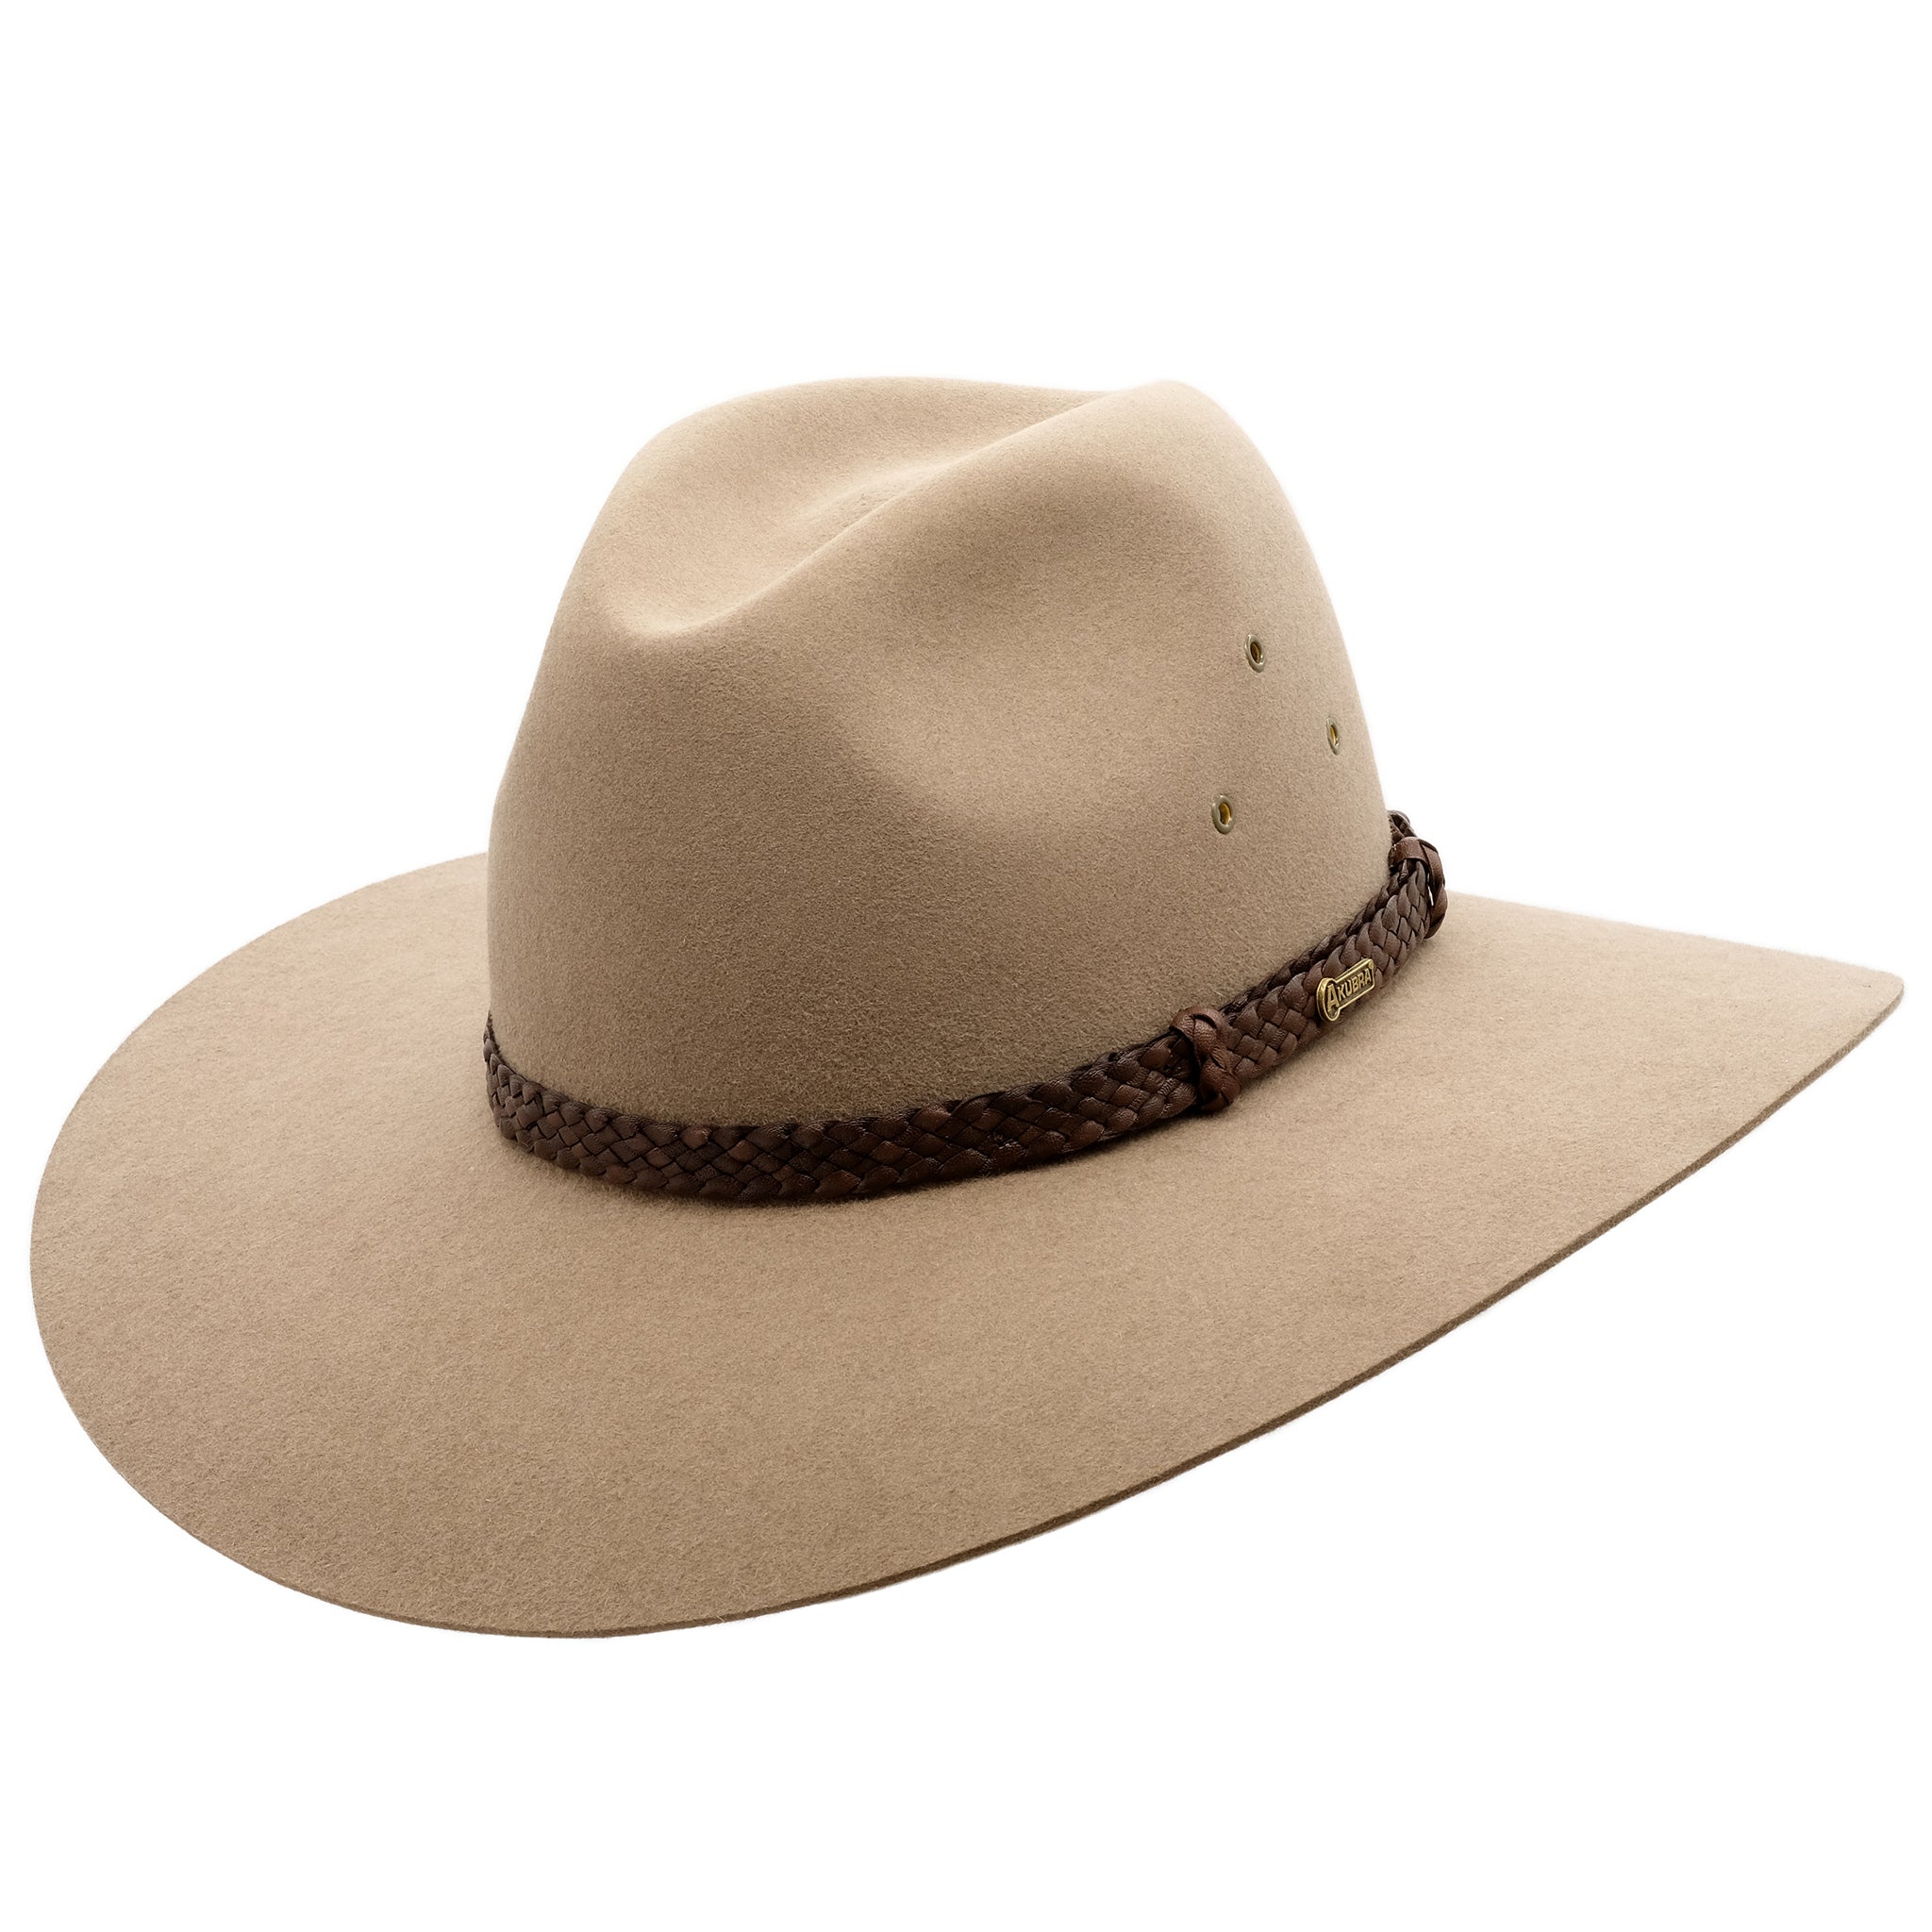 angle view of the Akubra Riverina Hat in Bran colour